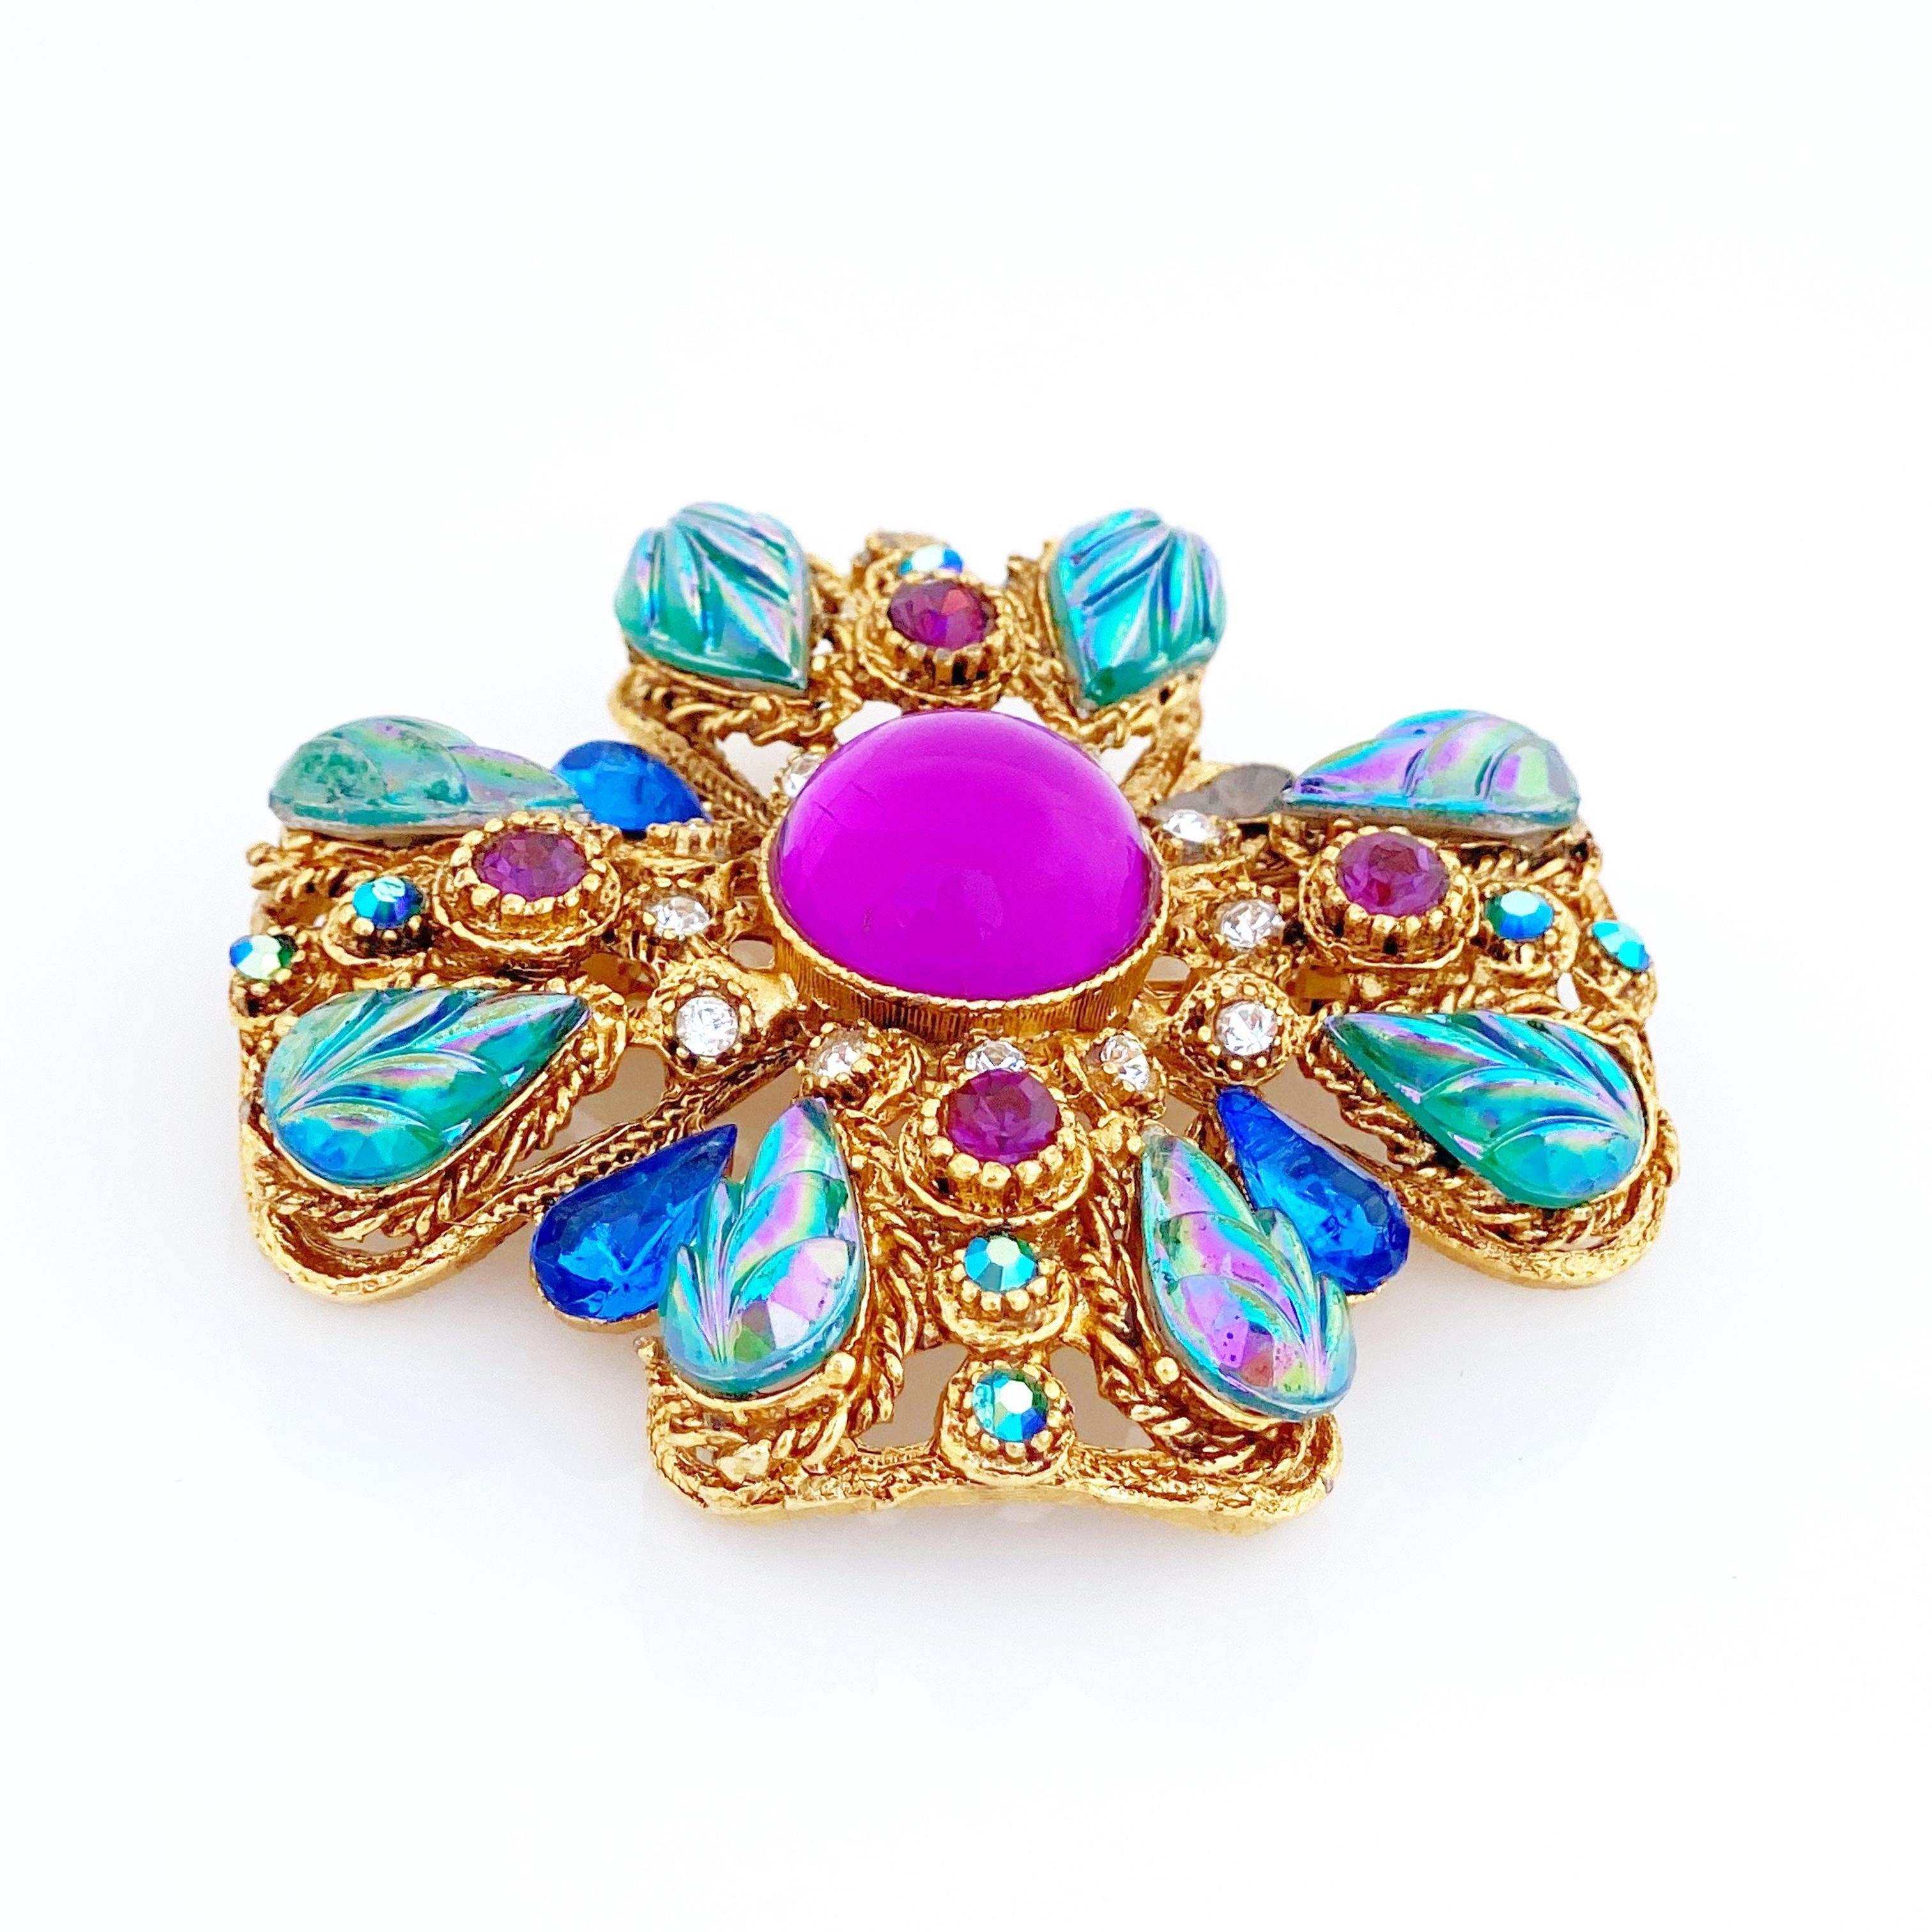 Modern Ornate Maltese Cross Brooch With Molded Glass & Rhinestones By Florenza, 1960s For Sale